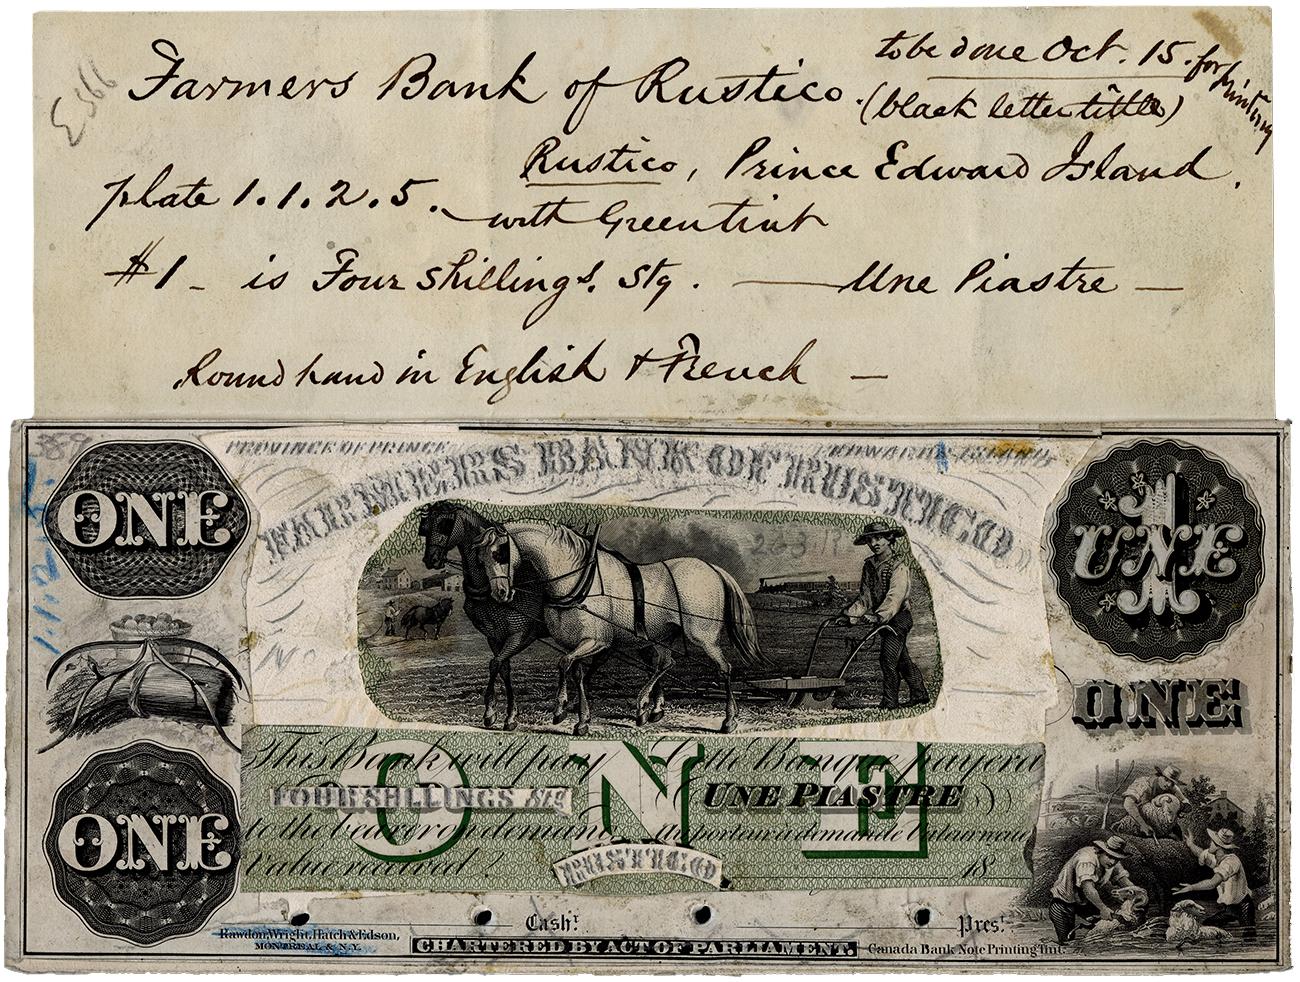 Bank note test print of agricultural images with hand-written note of printing instructions and description.